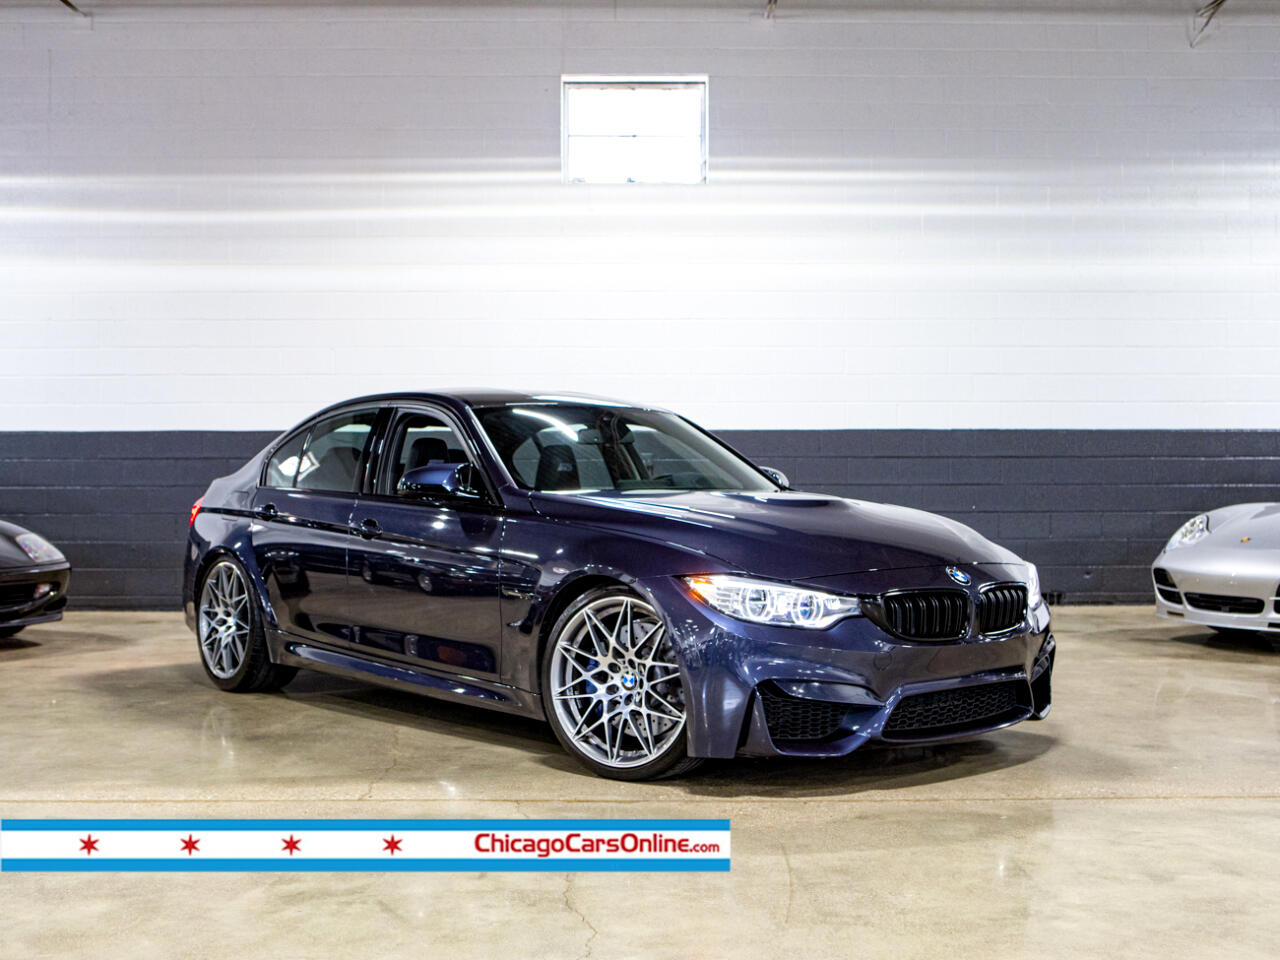 Used 17 Bmw M3 Jahre 30 Competition For Sale In Addison Il Chicago Cars Online